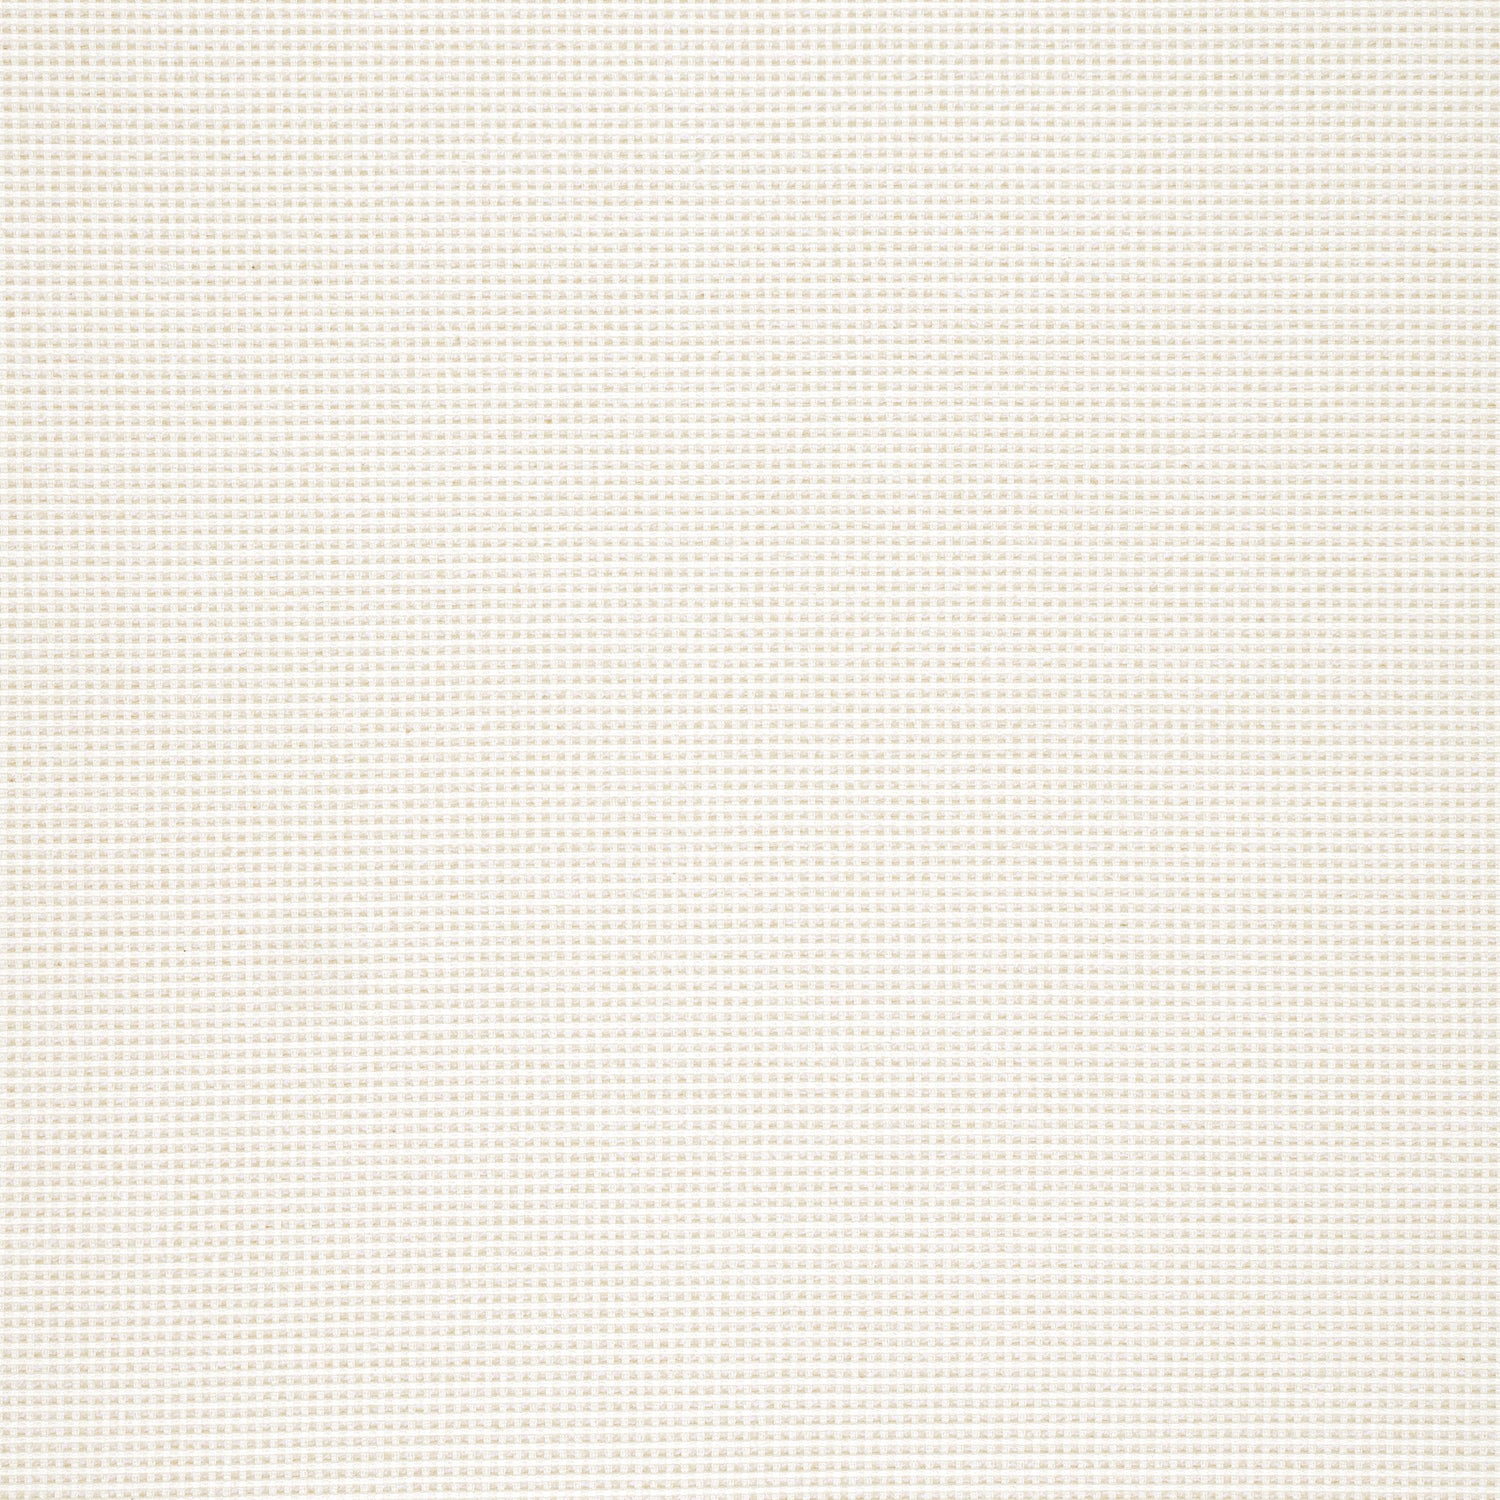 Stella fabric in parchment color - pattern number W77114 - by Thibaut in the Veneto collection